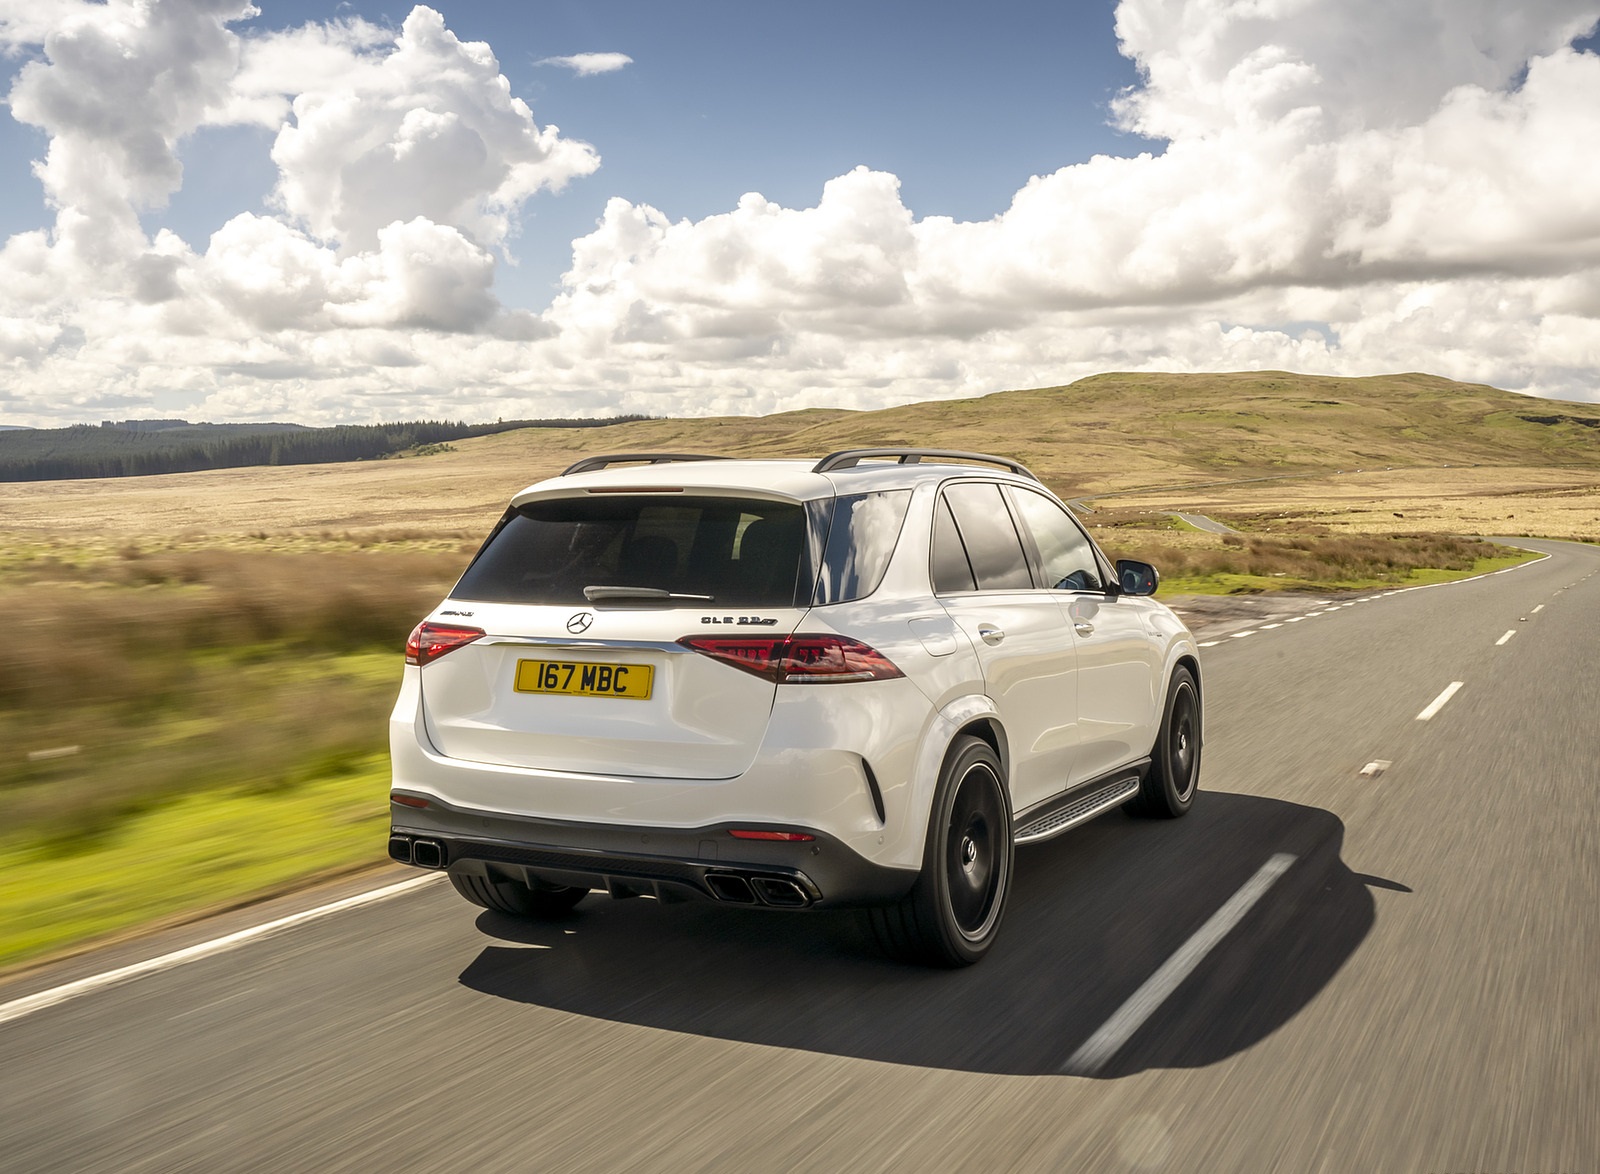 2021 Mercedes-AMG GLE 63 S 4MATIC (UK-Spec) Rear Three-Quarter Wallpapers #28 of 187